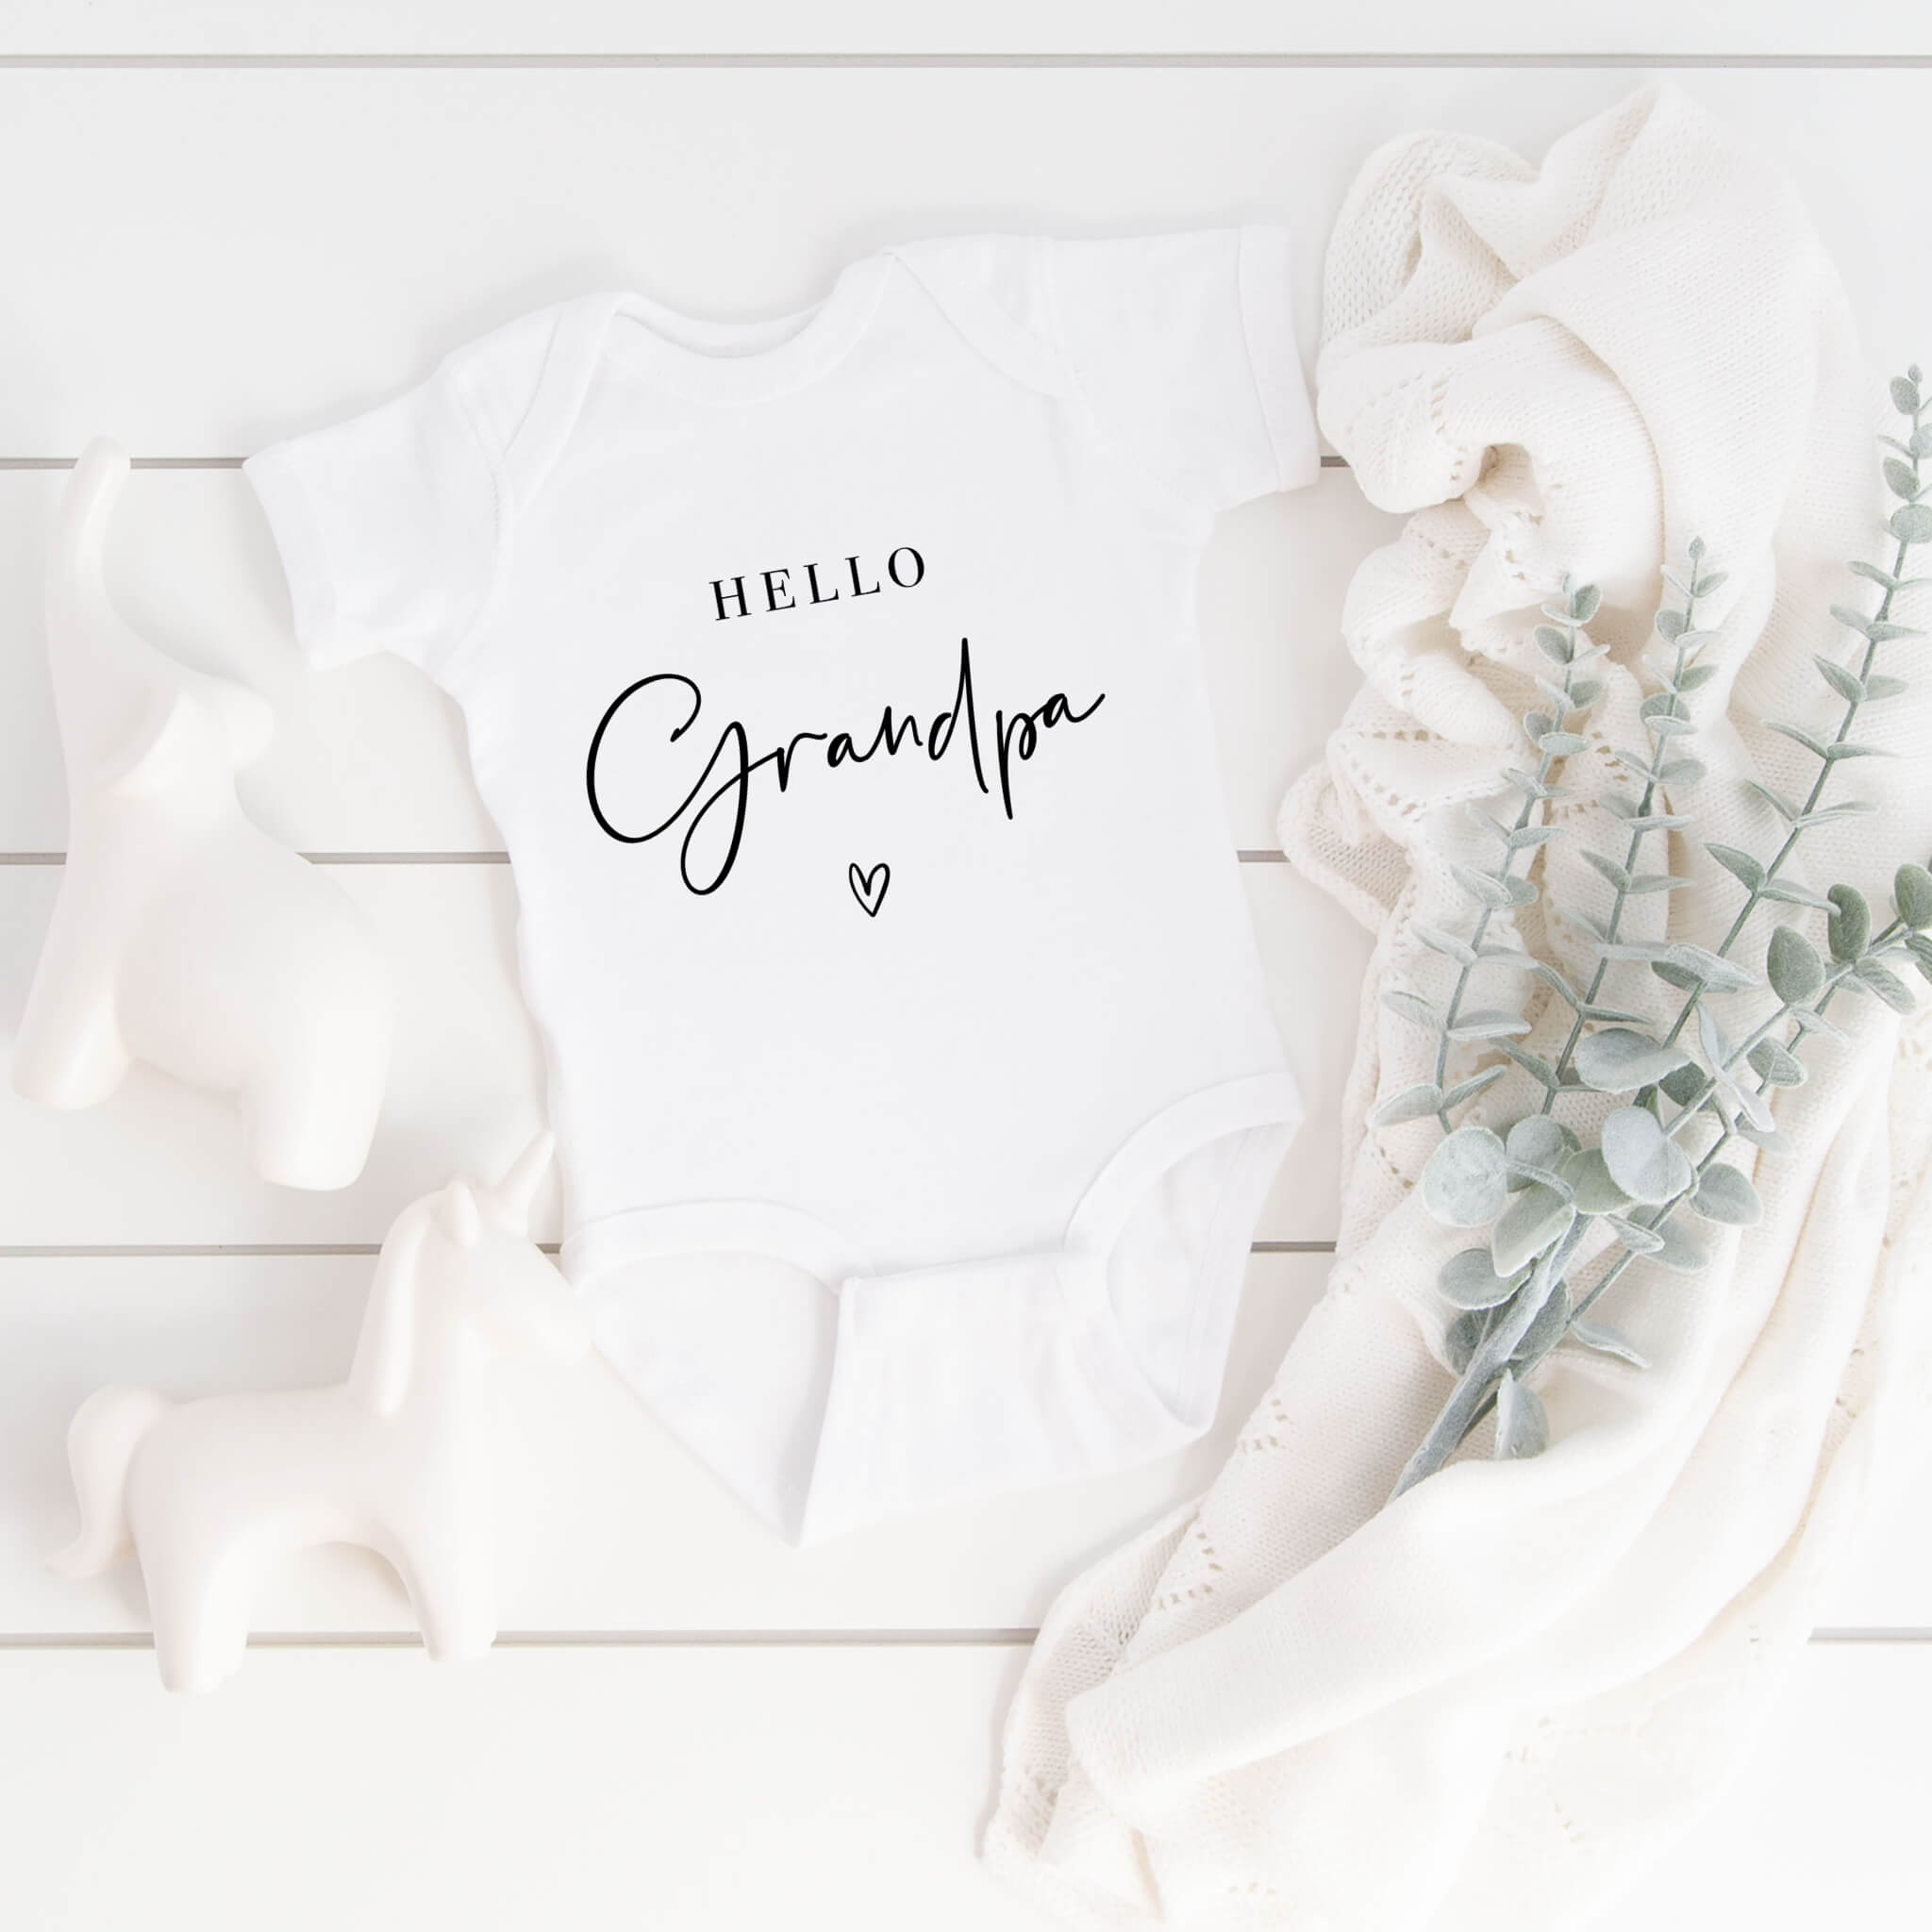 Personalized Pregnancy Announcement, Hello Grandpa To Be, Papa, Pops, Gpa, Customized Baby Announcement Onesie, Personalized Pregnancy Announcement Gift Box, Personalized Baby Announcement Gift Box